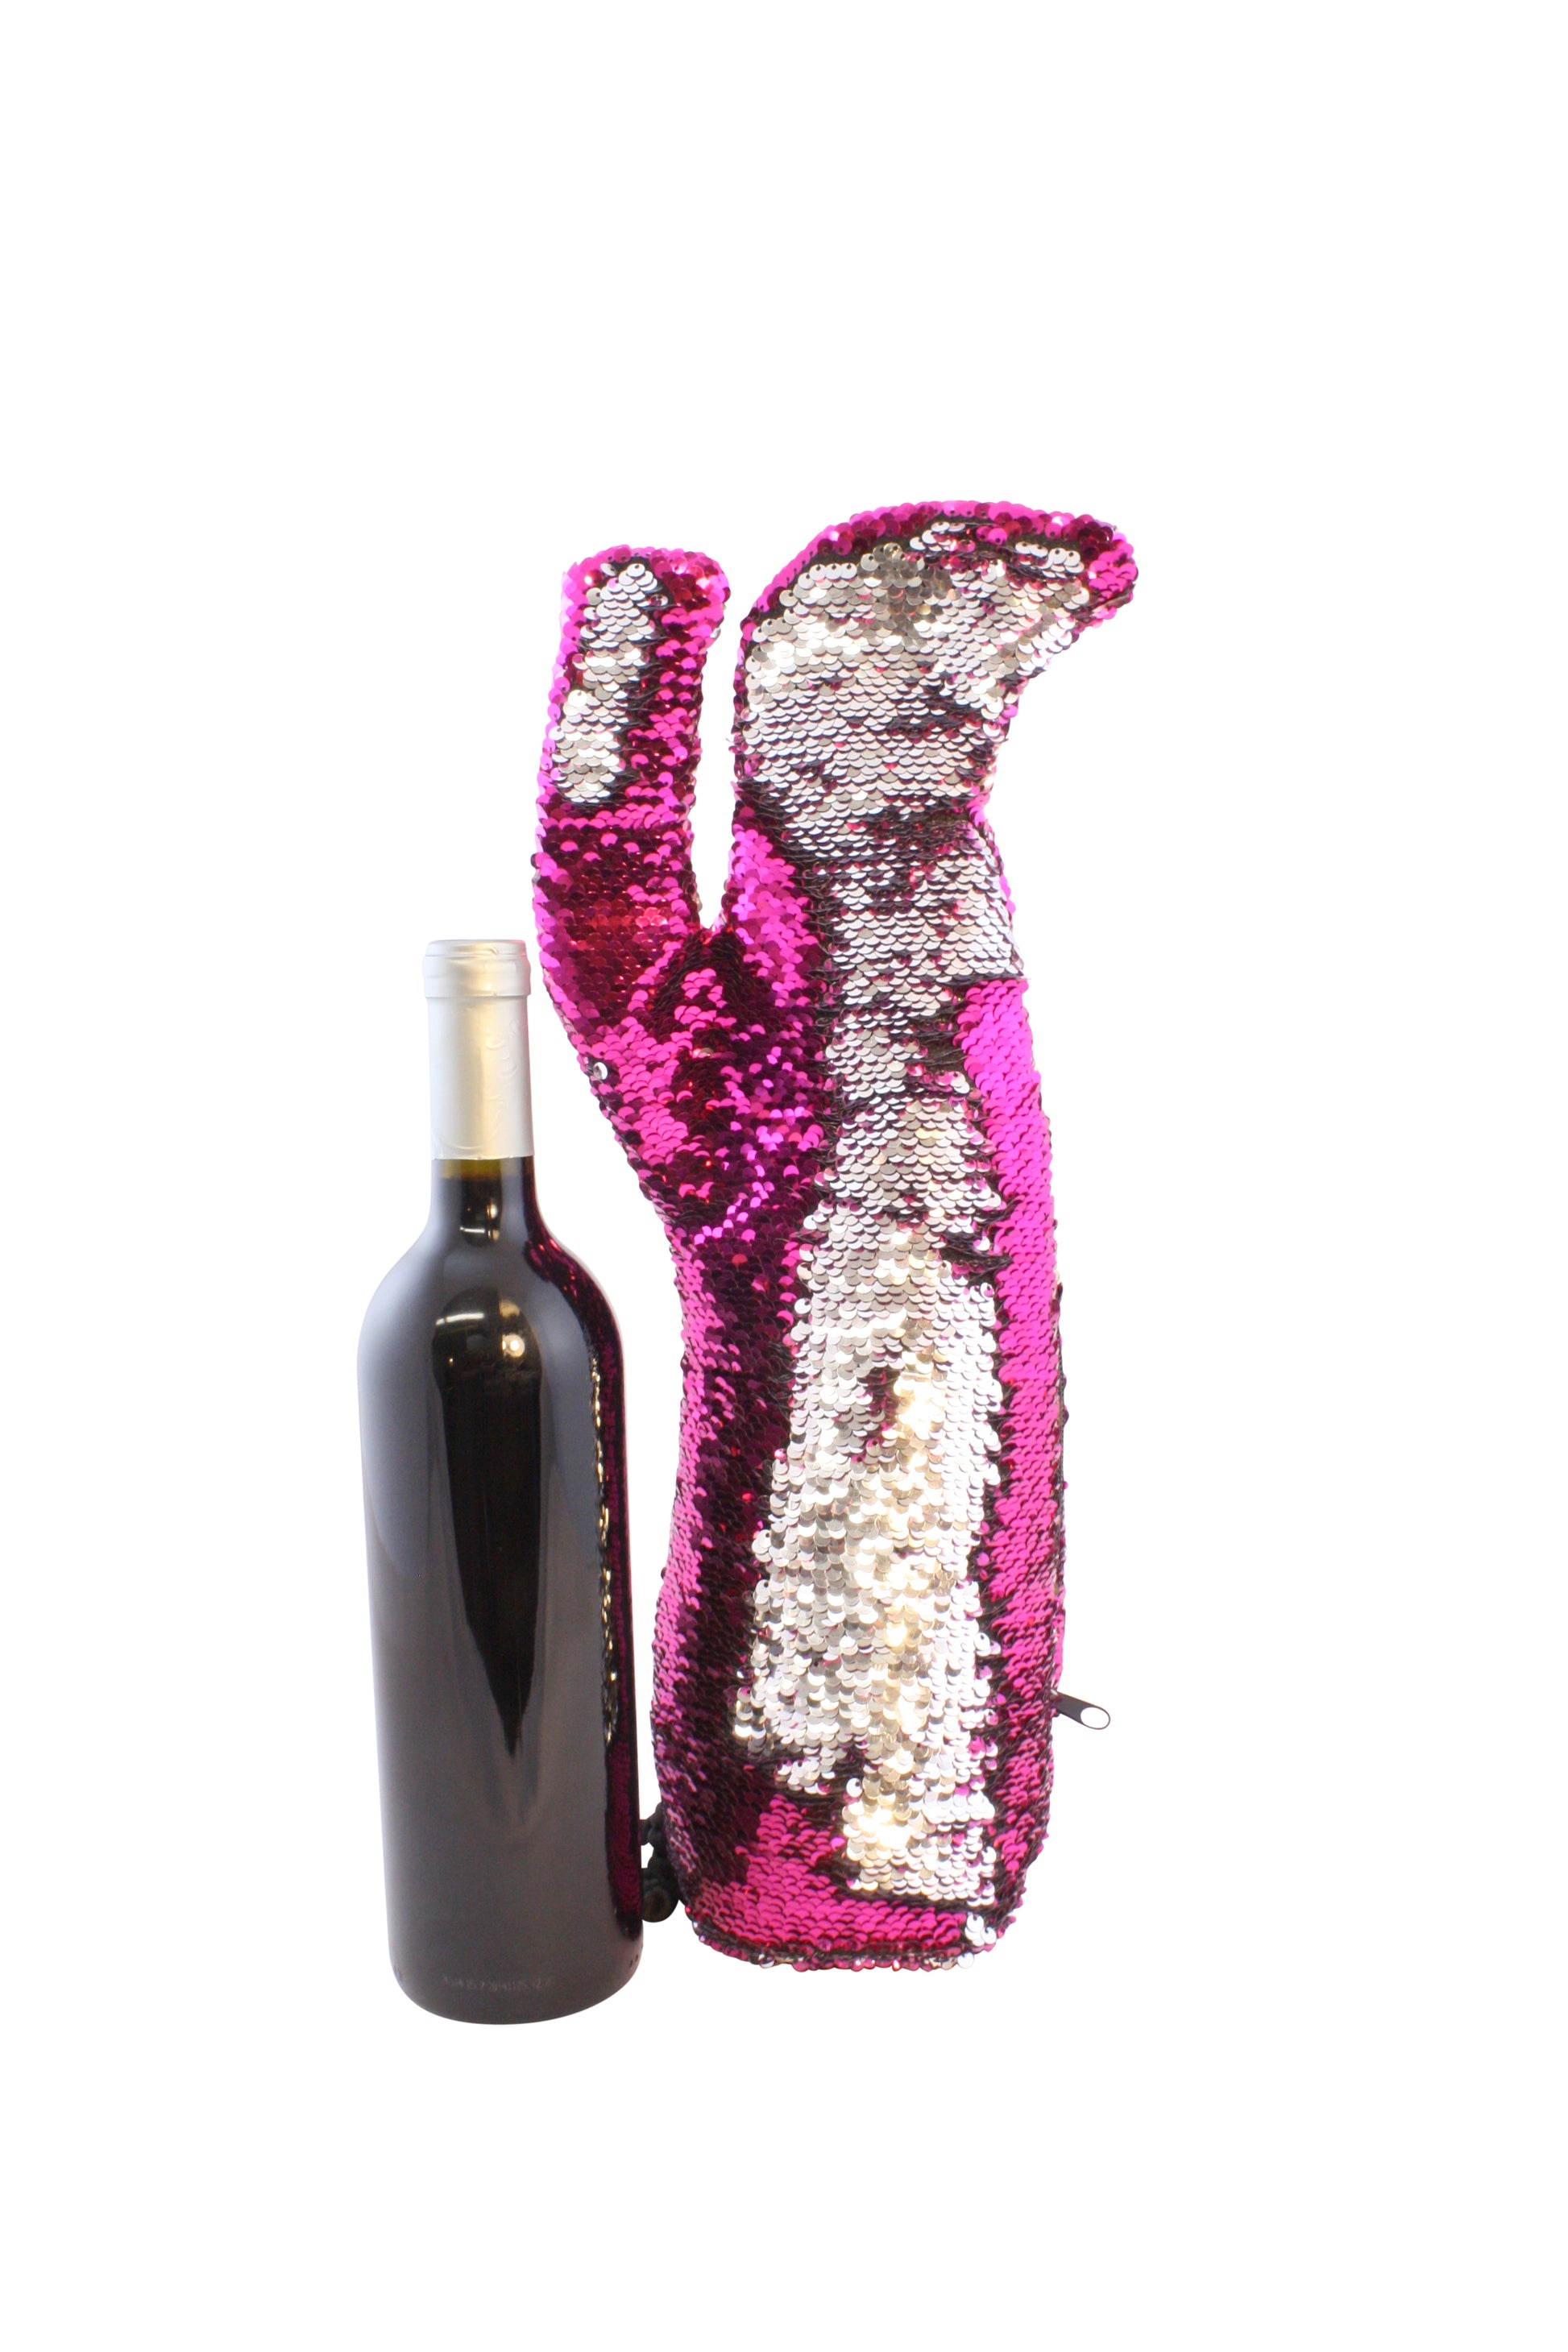 Sexy Stiletto Fashion Wine Bag in Hot Pink and Silver Sequins by Tipsy Totes